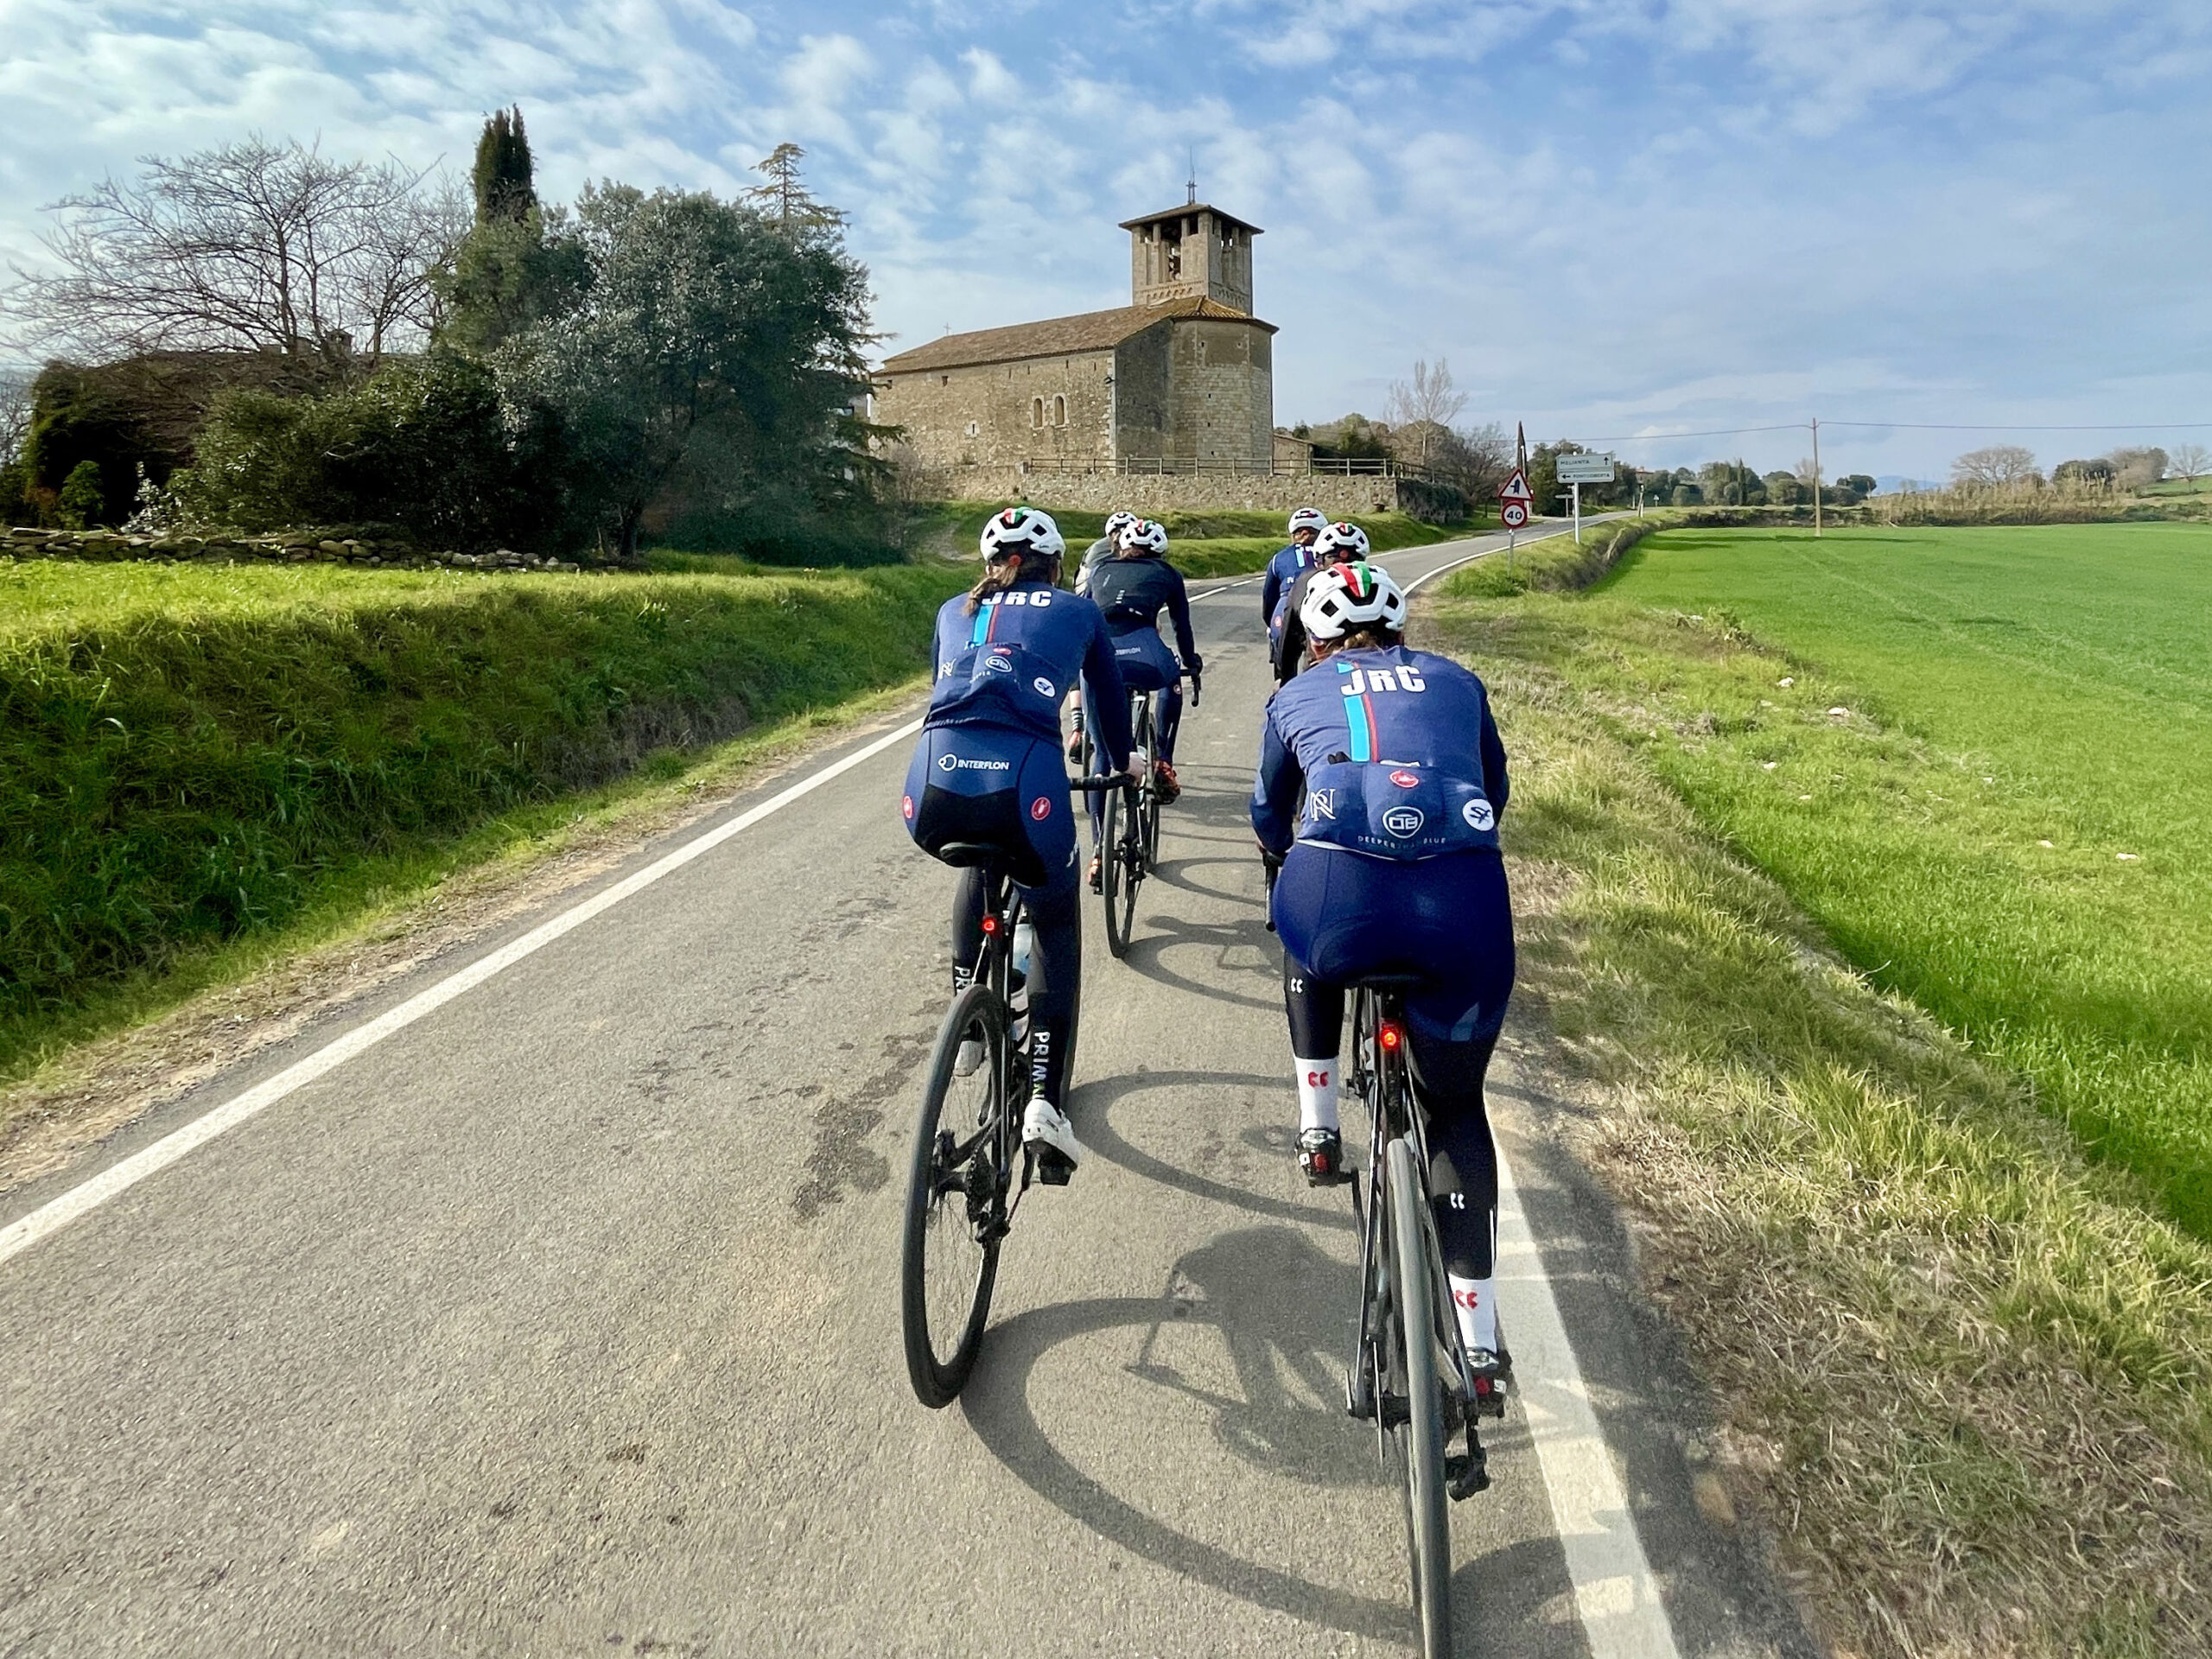 Riders from JRC Women's Junior Cycling team riding away from the camera on a paved road toward an old stone building in Girona.